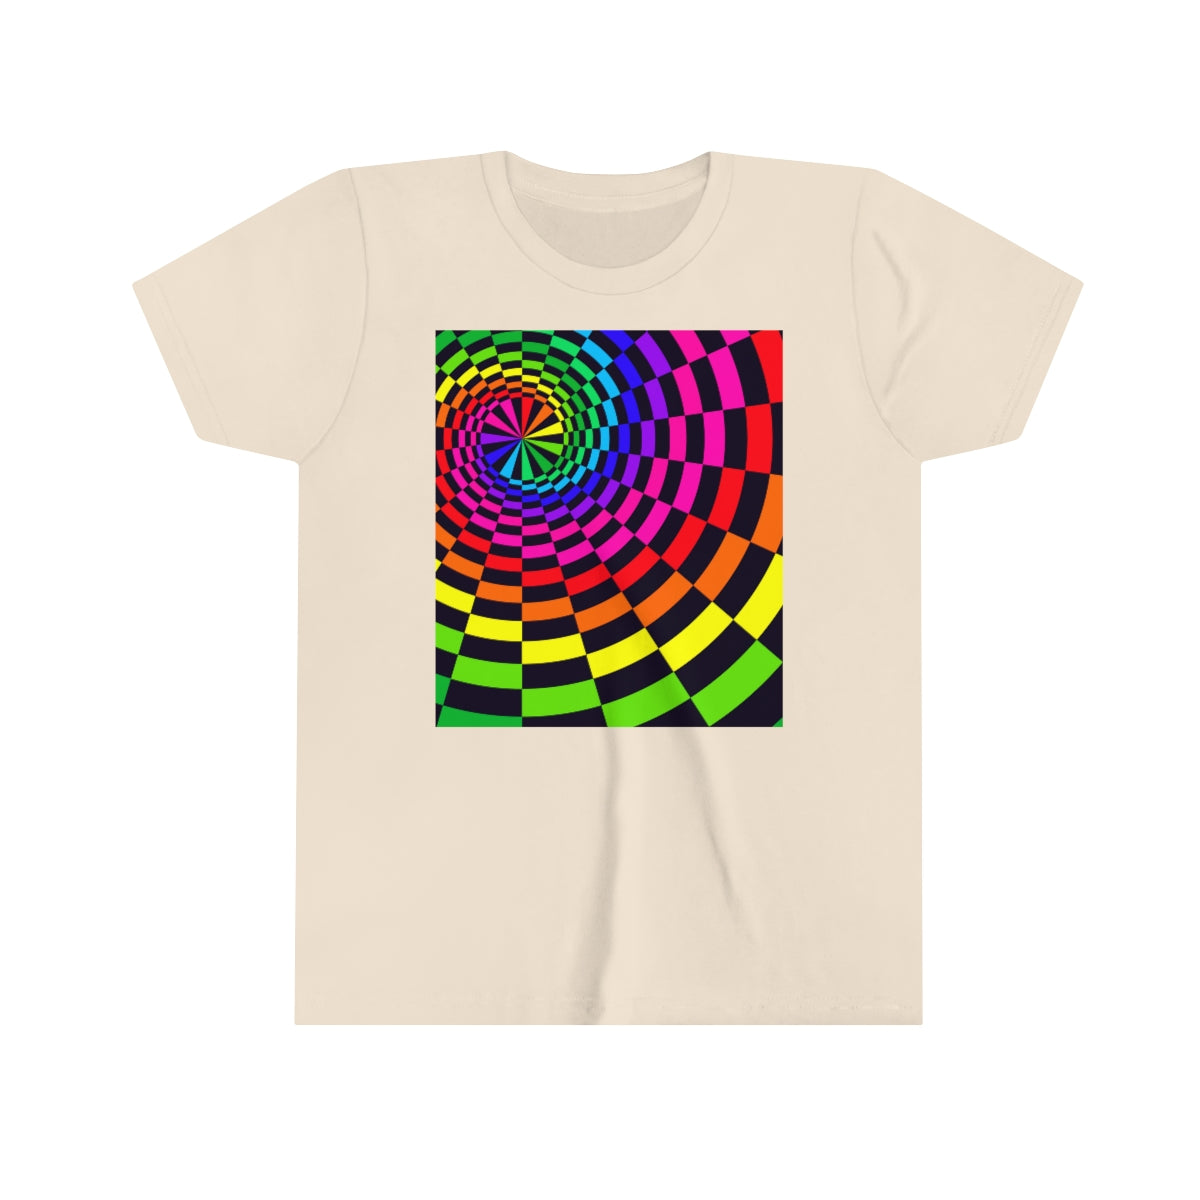 Youth Short Sleeve Tee "Optical illusion Black Spirals of the Rectangles"